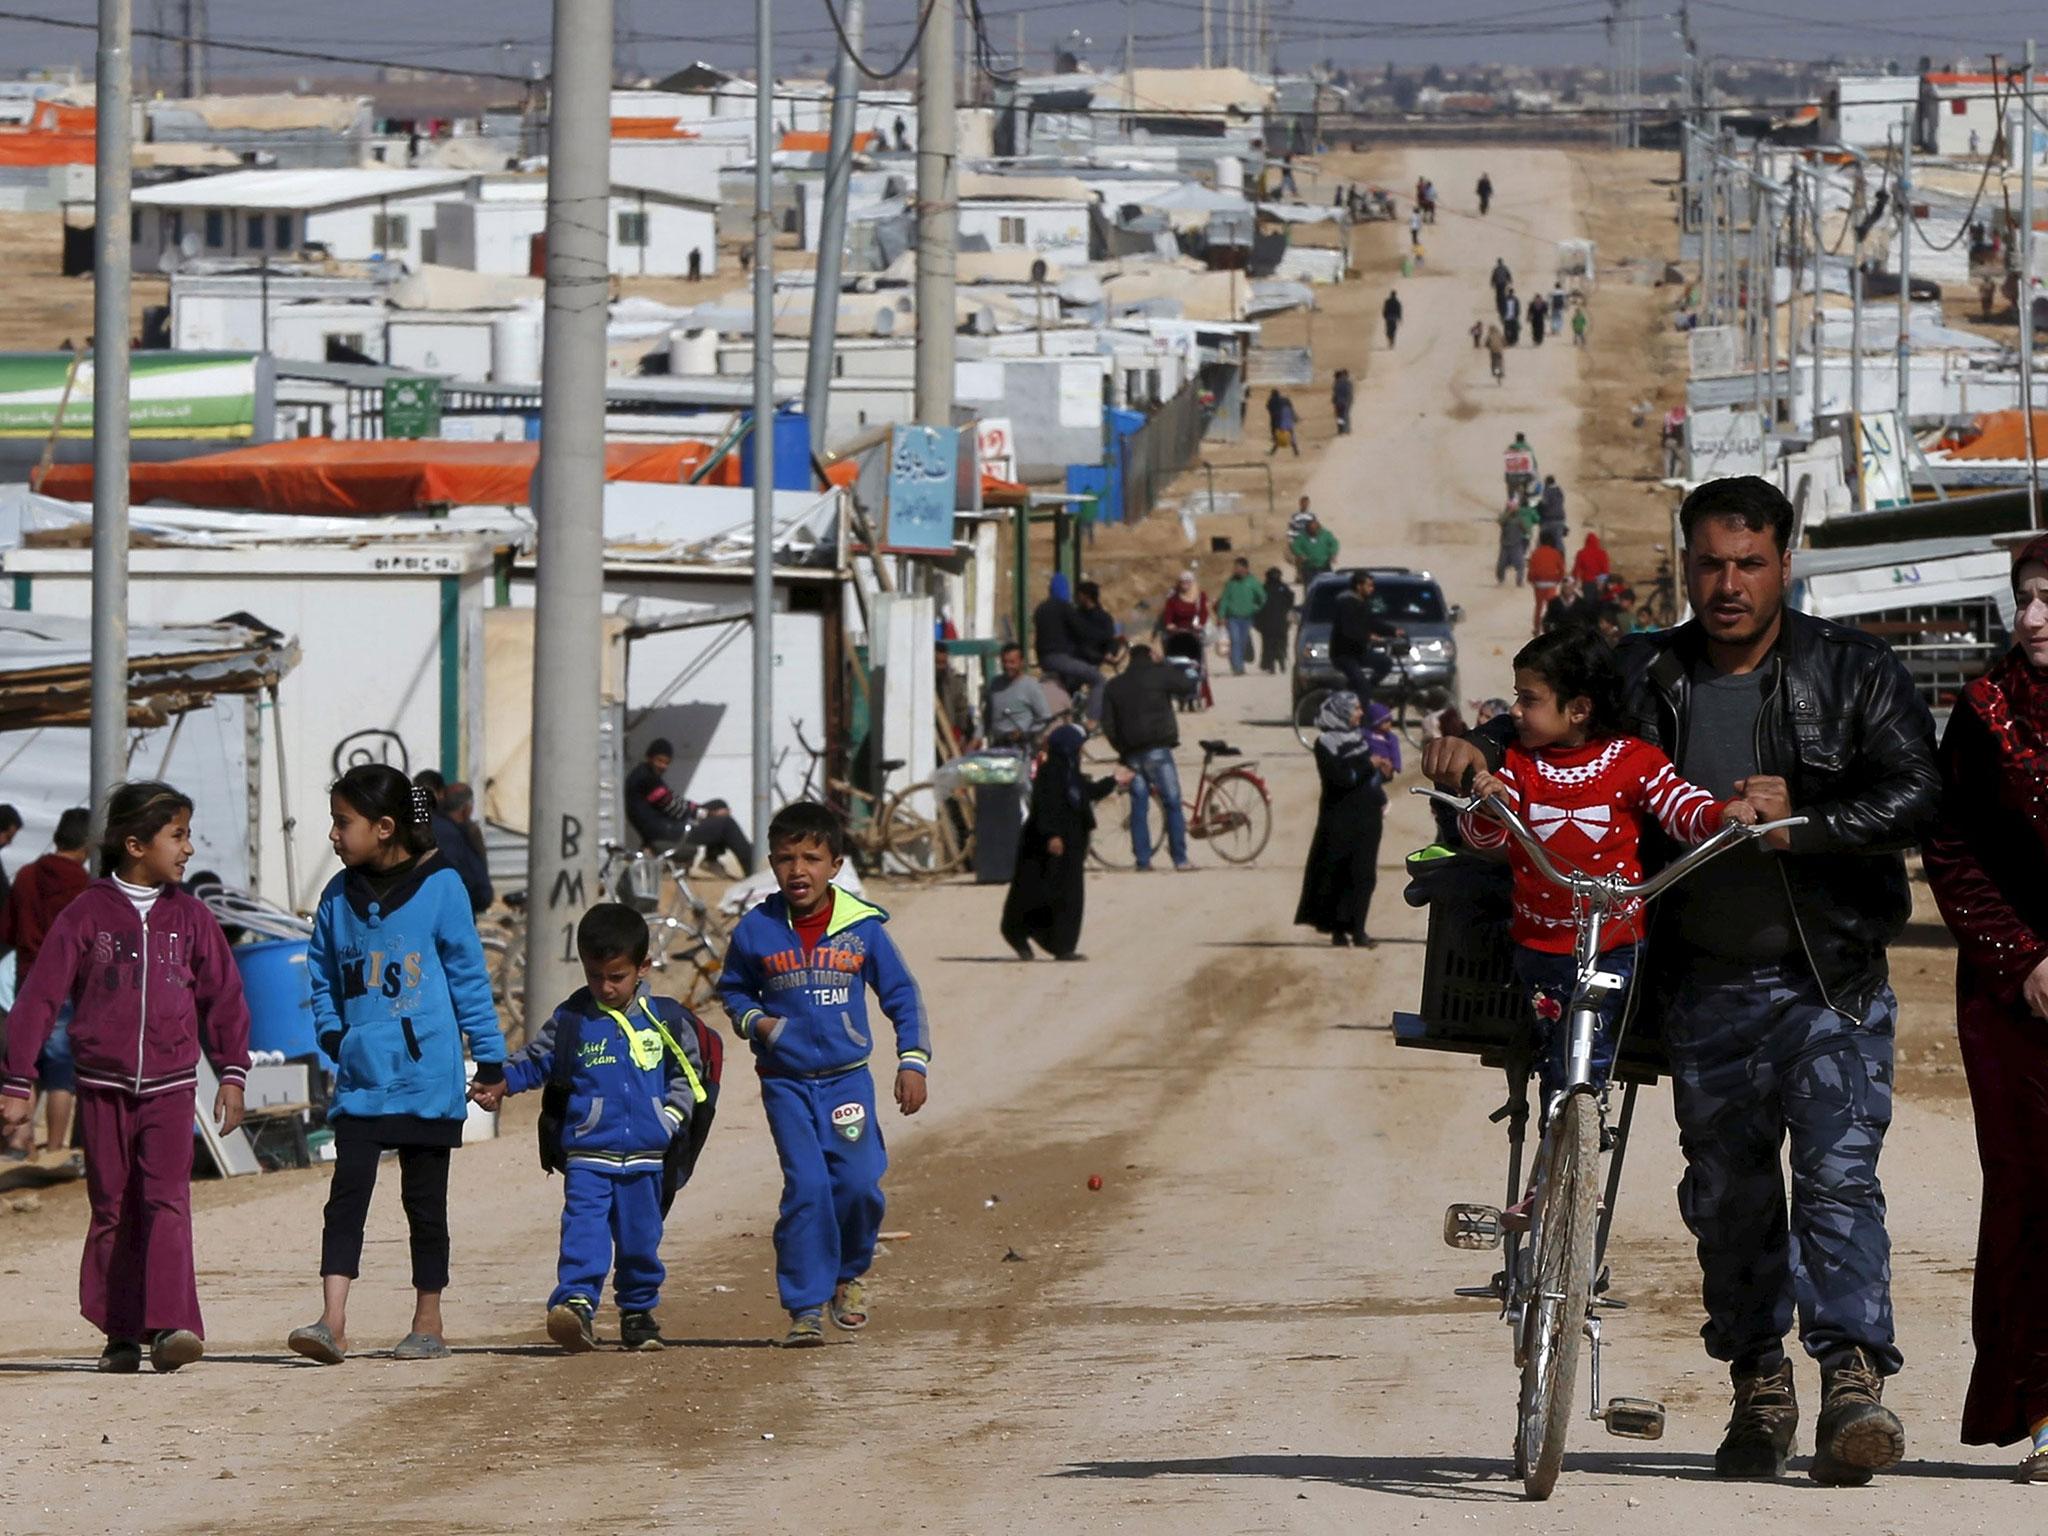 Nearly 80,000 refugees are living at the Al Zaatari refugee camp in Jordan